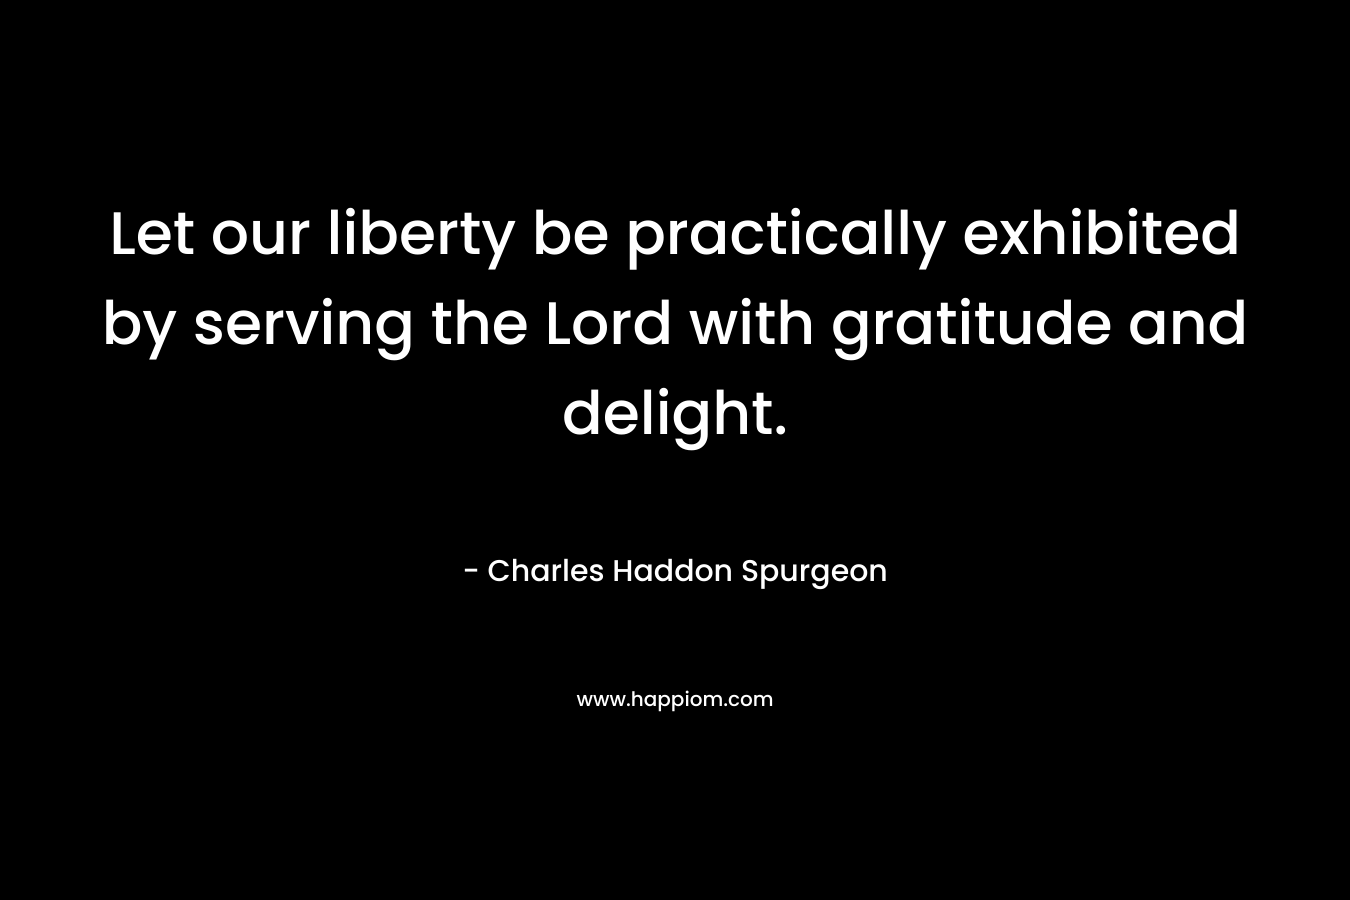 Let our liberty be practically exhibited by serving the Lord with gratitude and delight.